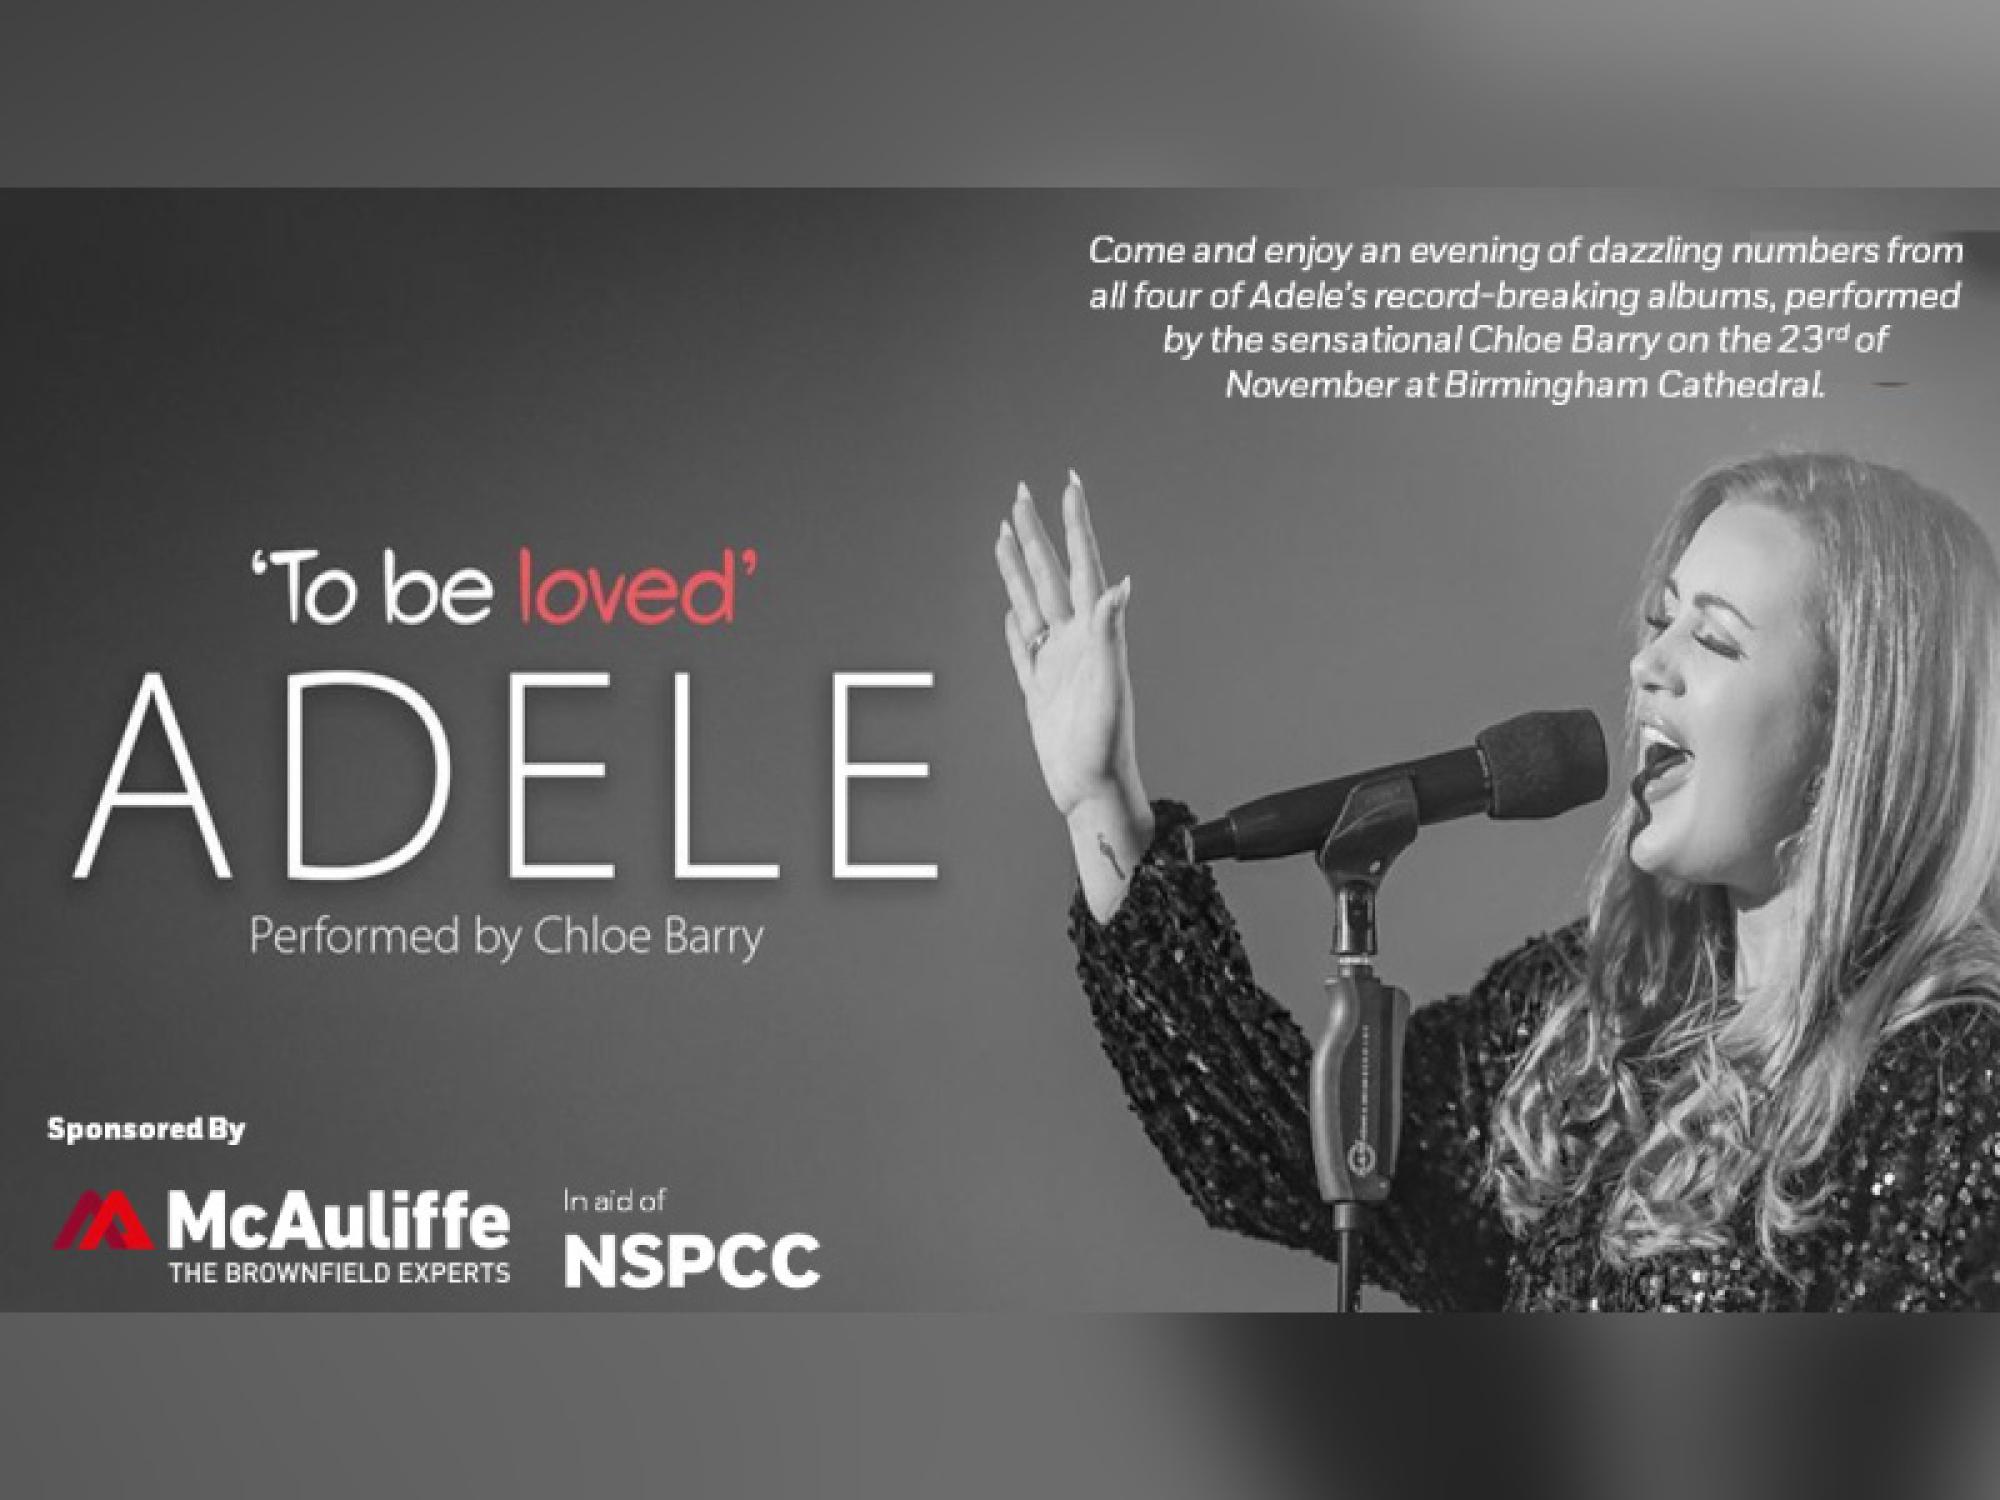 NSPCC ‘Adele By Candlelight’ concert | McAuliffe Group